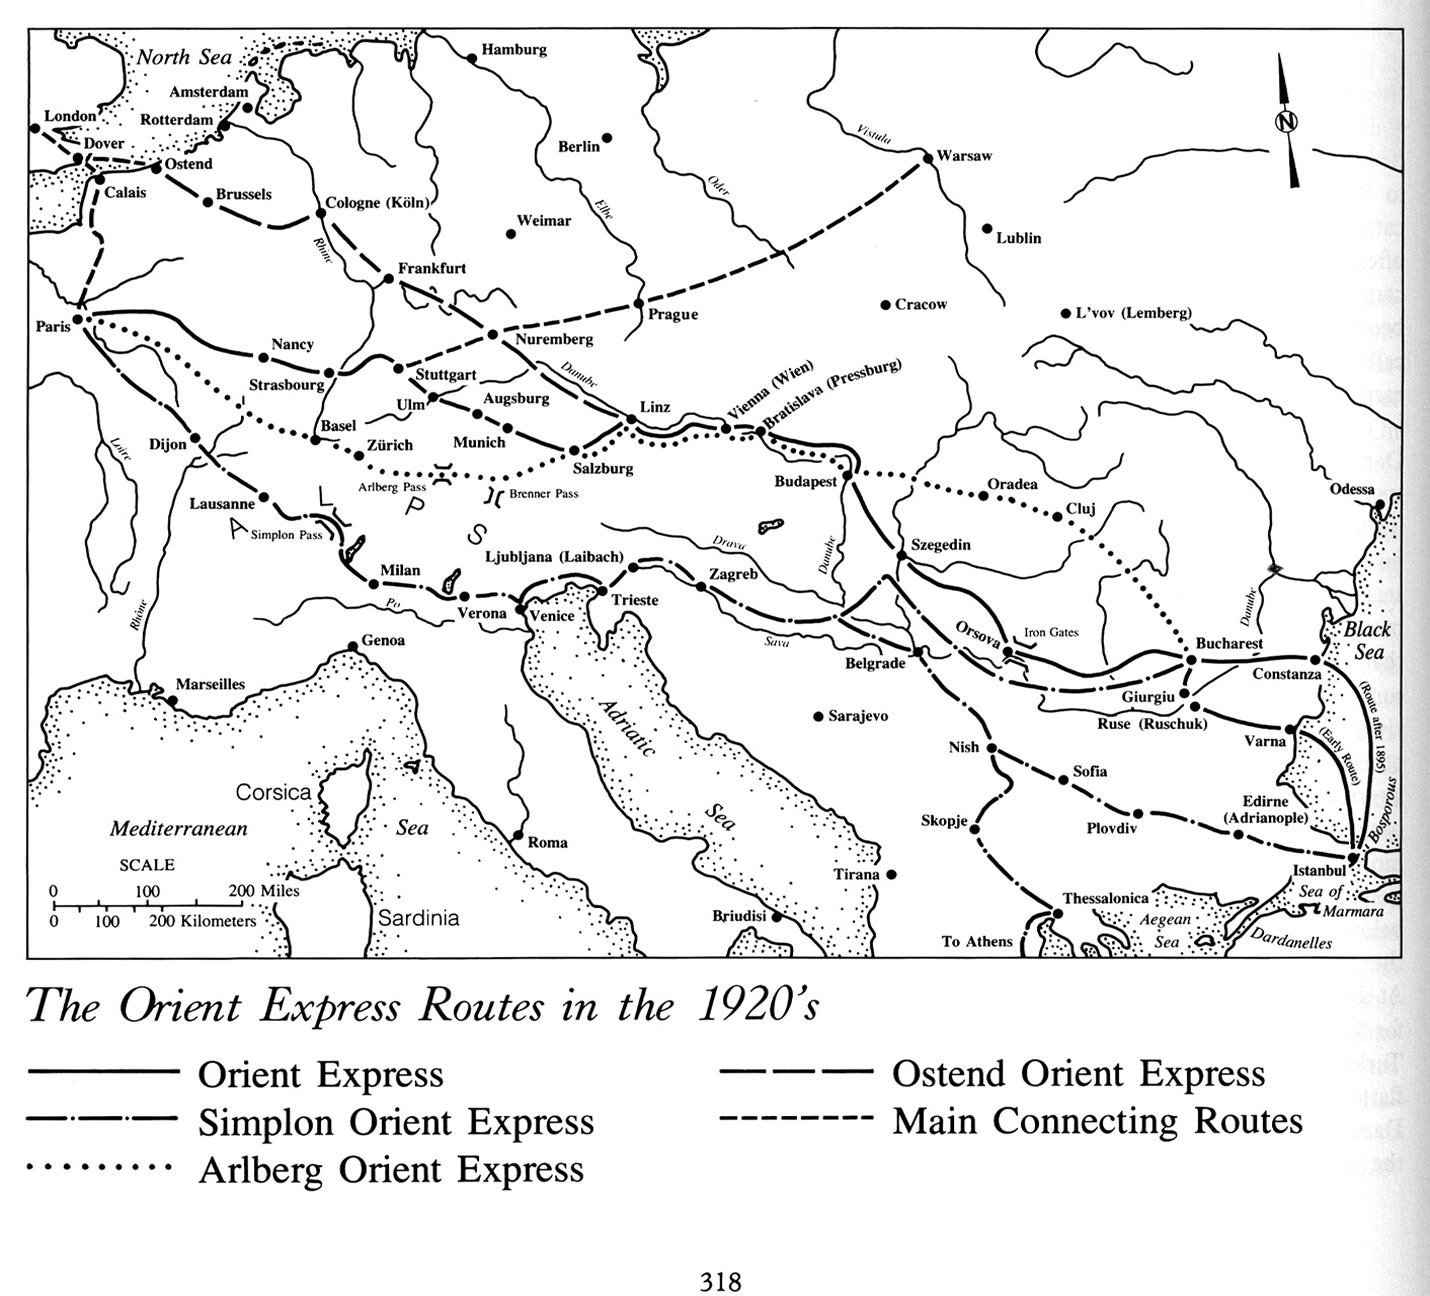 Map from brochure for the Simplon Orient Express, c. 1932